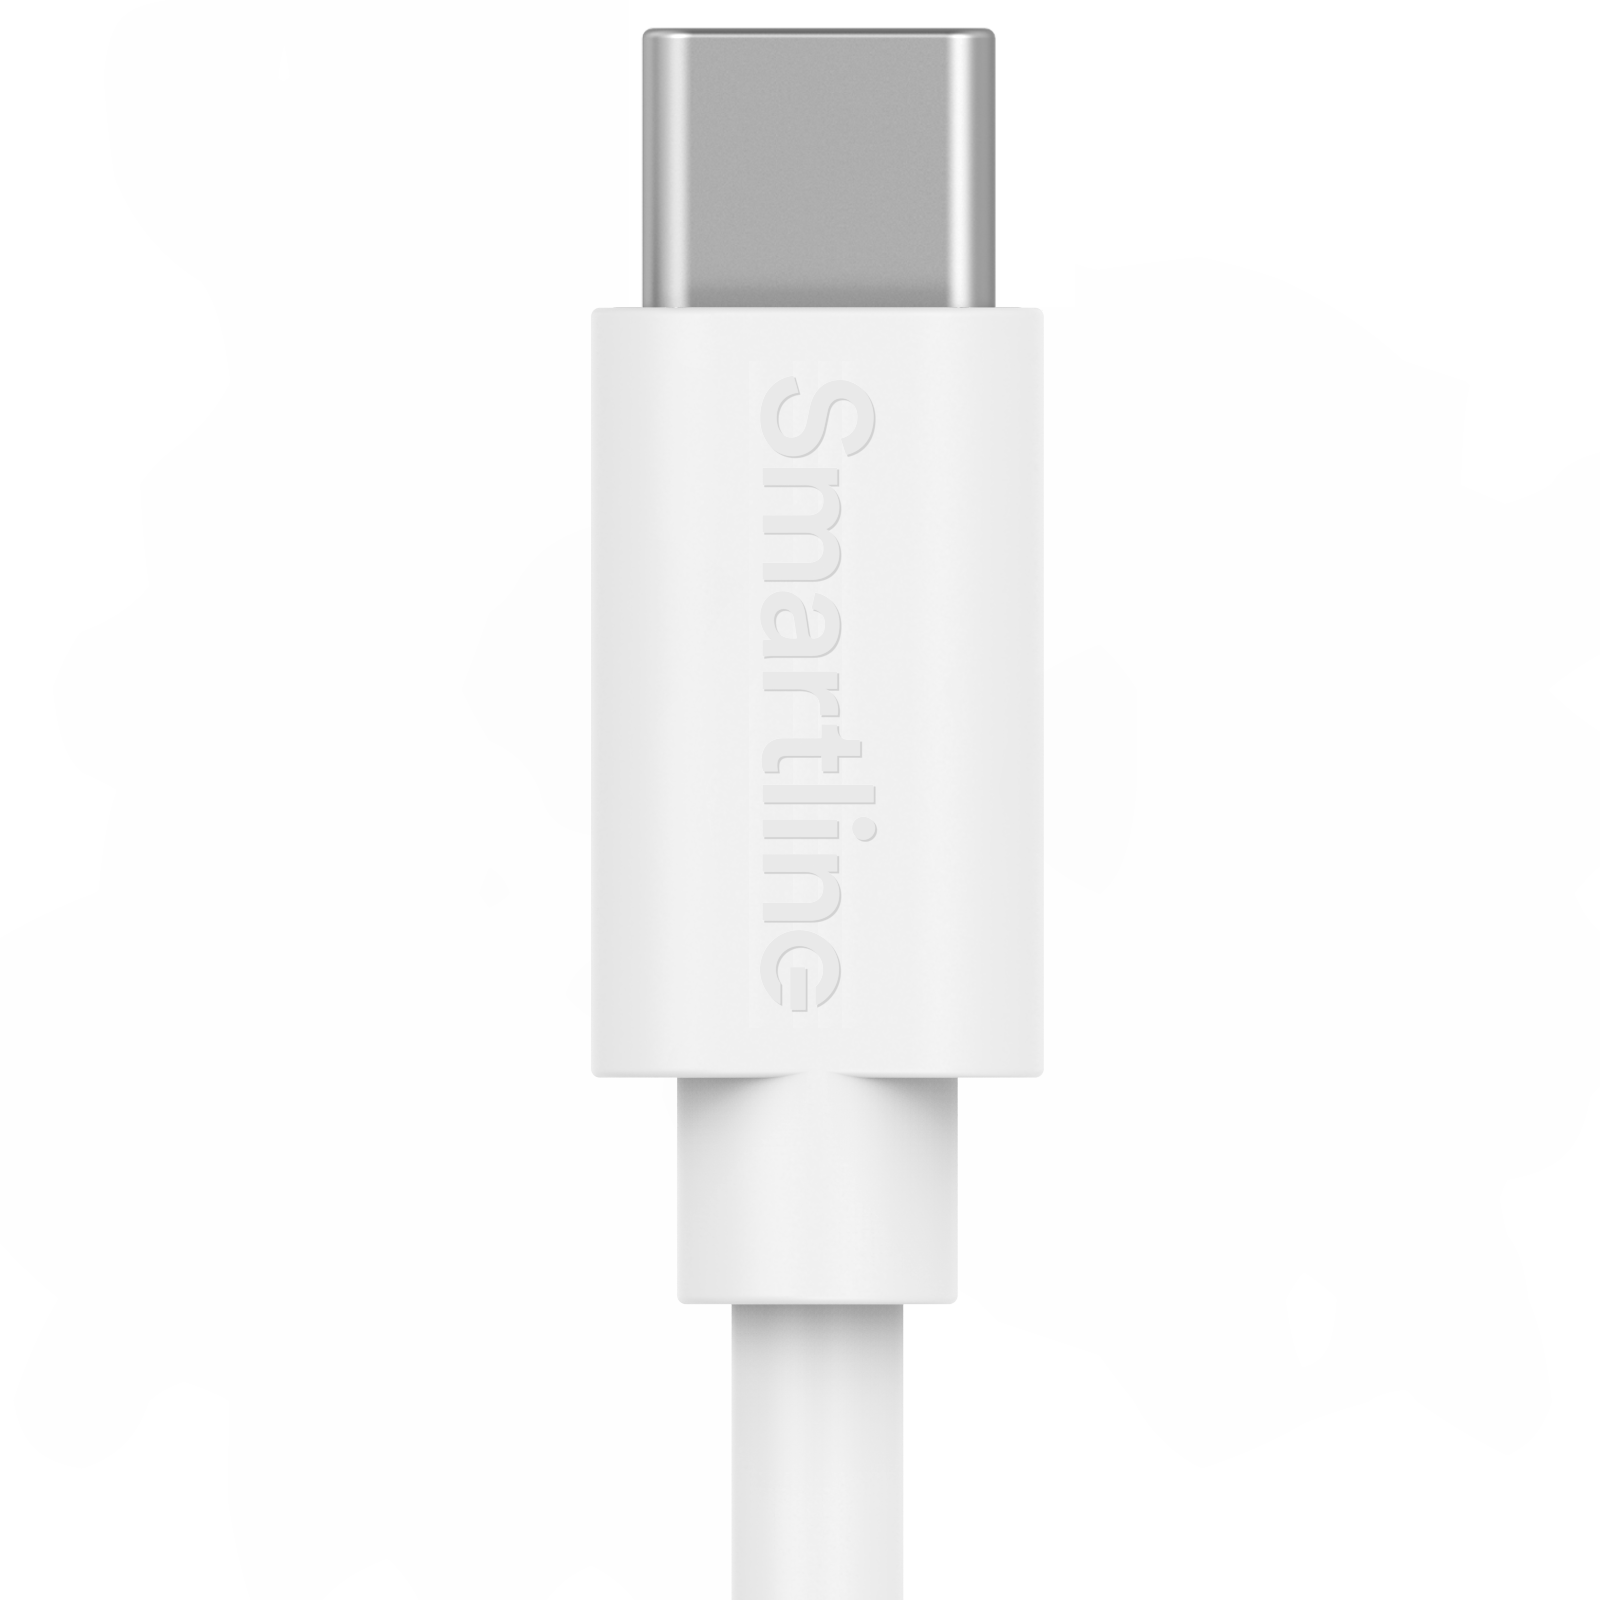 Complete Charger for Google Pixel - 2m Cable and Wall Charger USB-C - Smartline